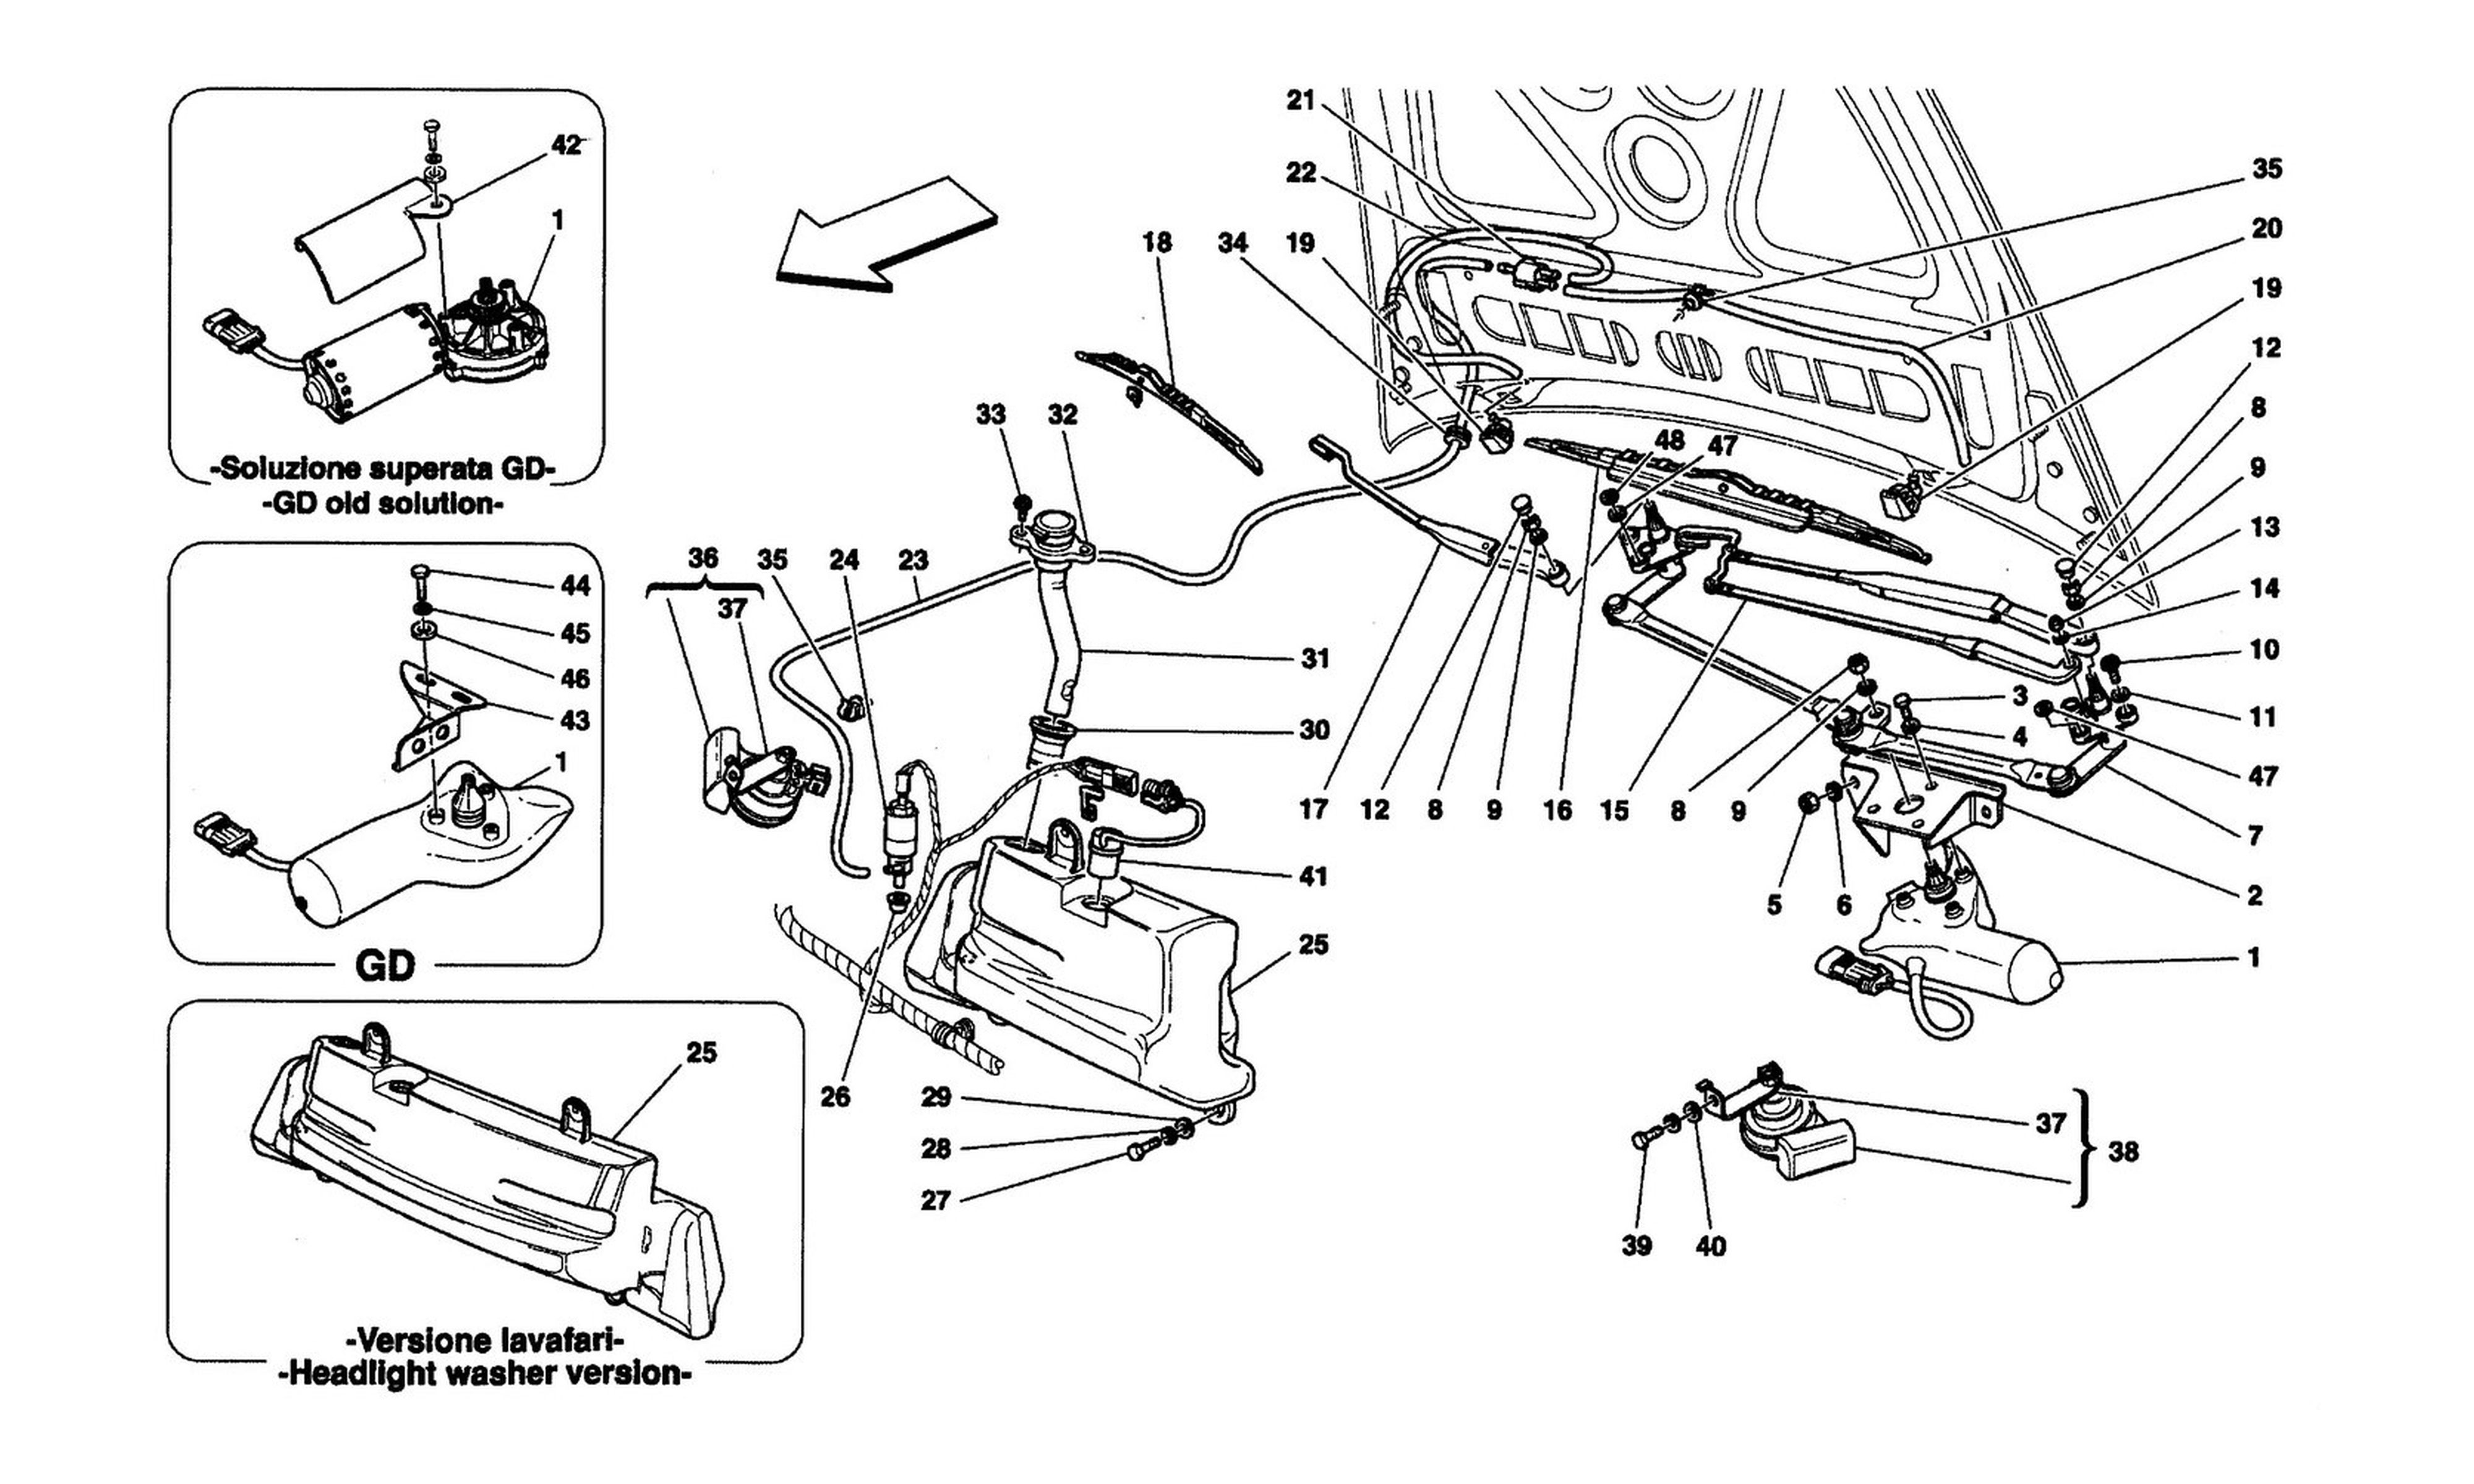 Schematic: Windshield, Glass Washer And Horns